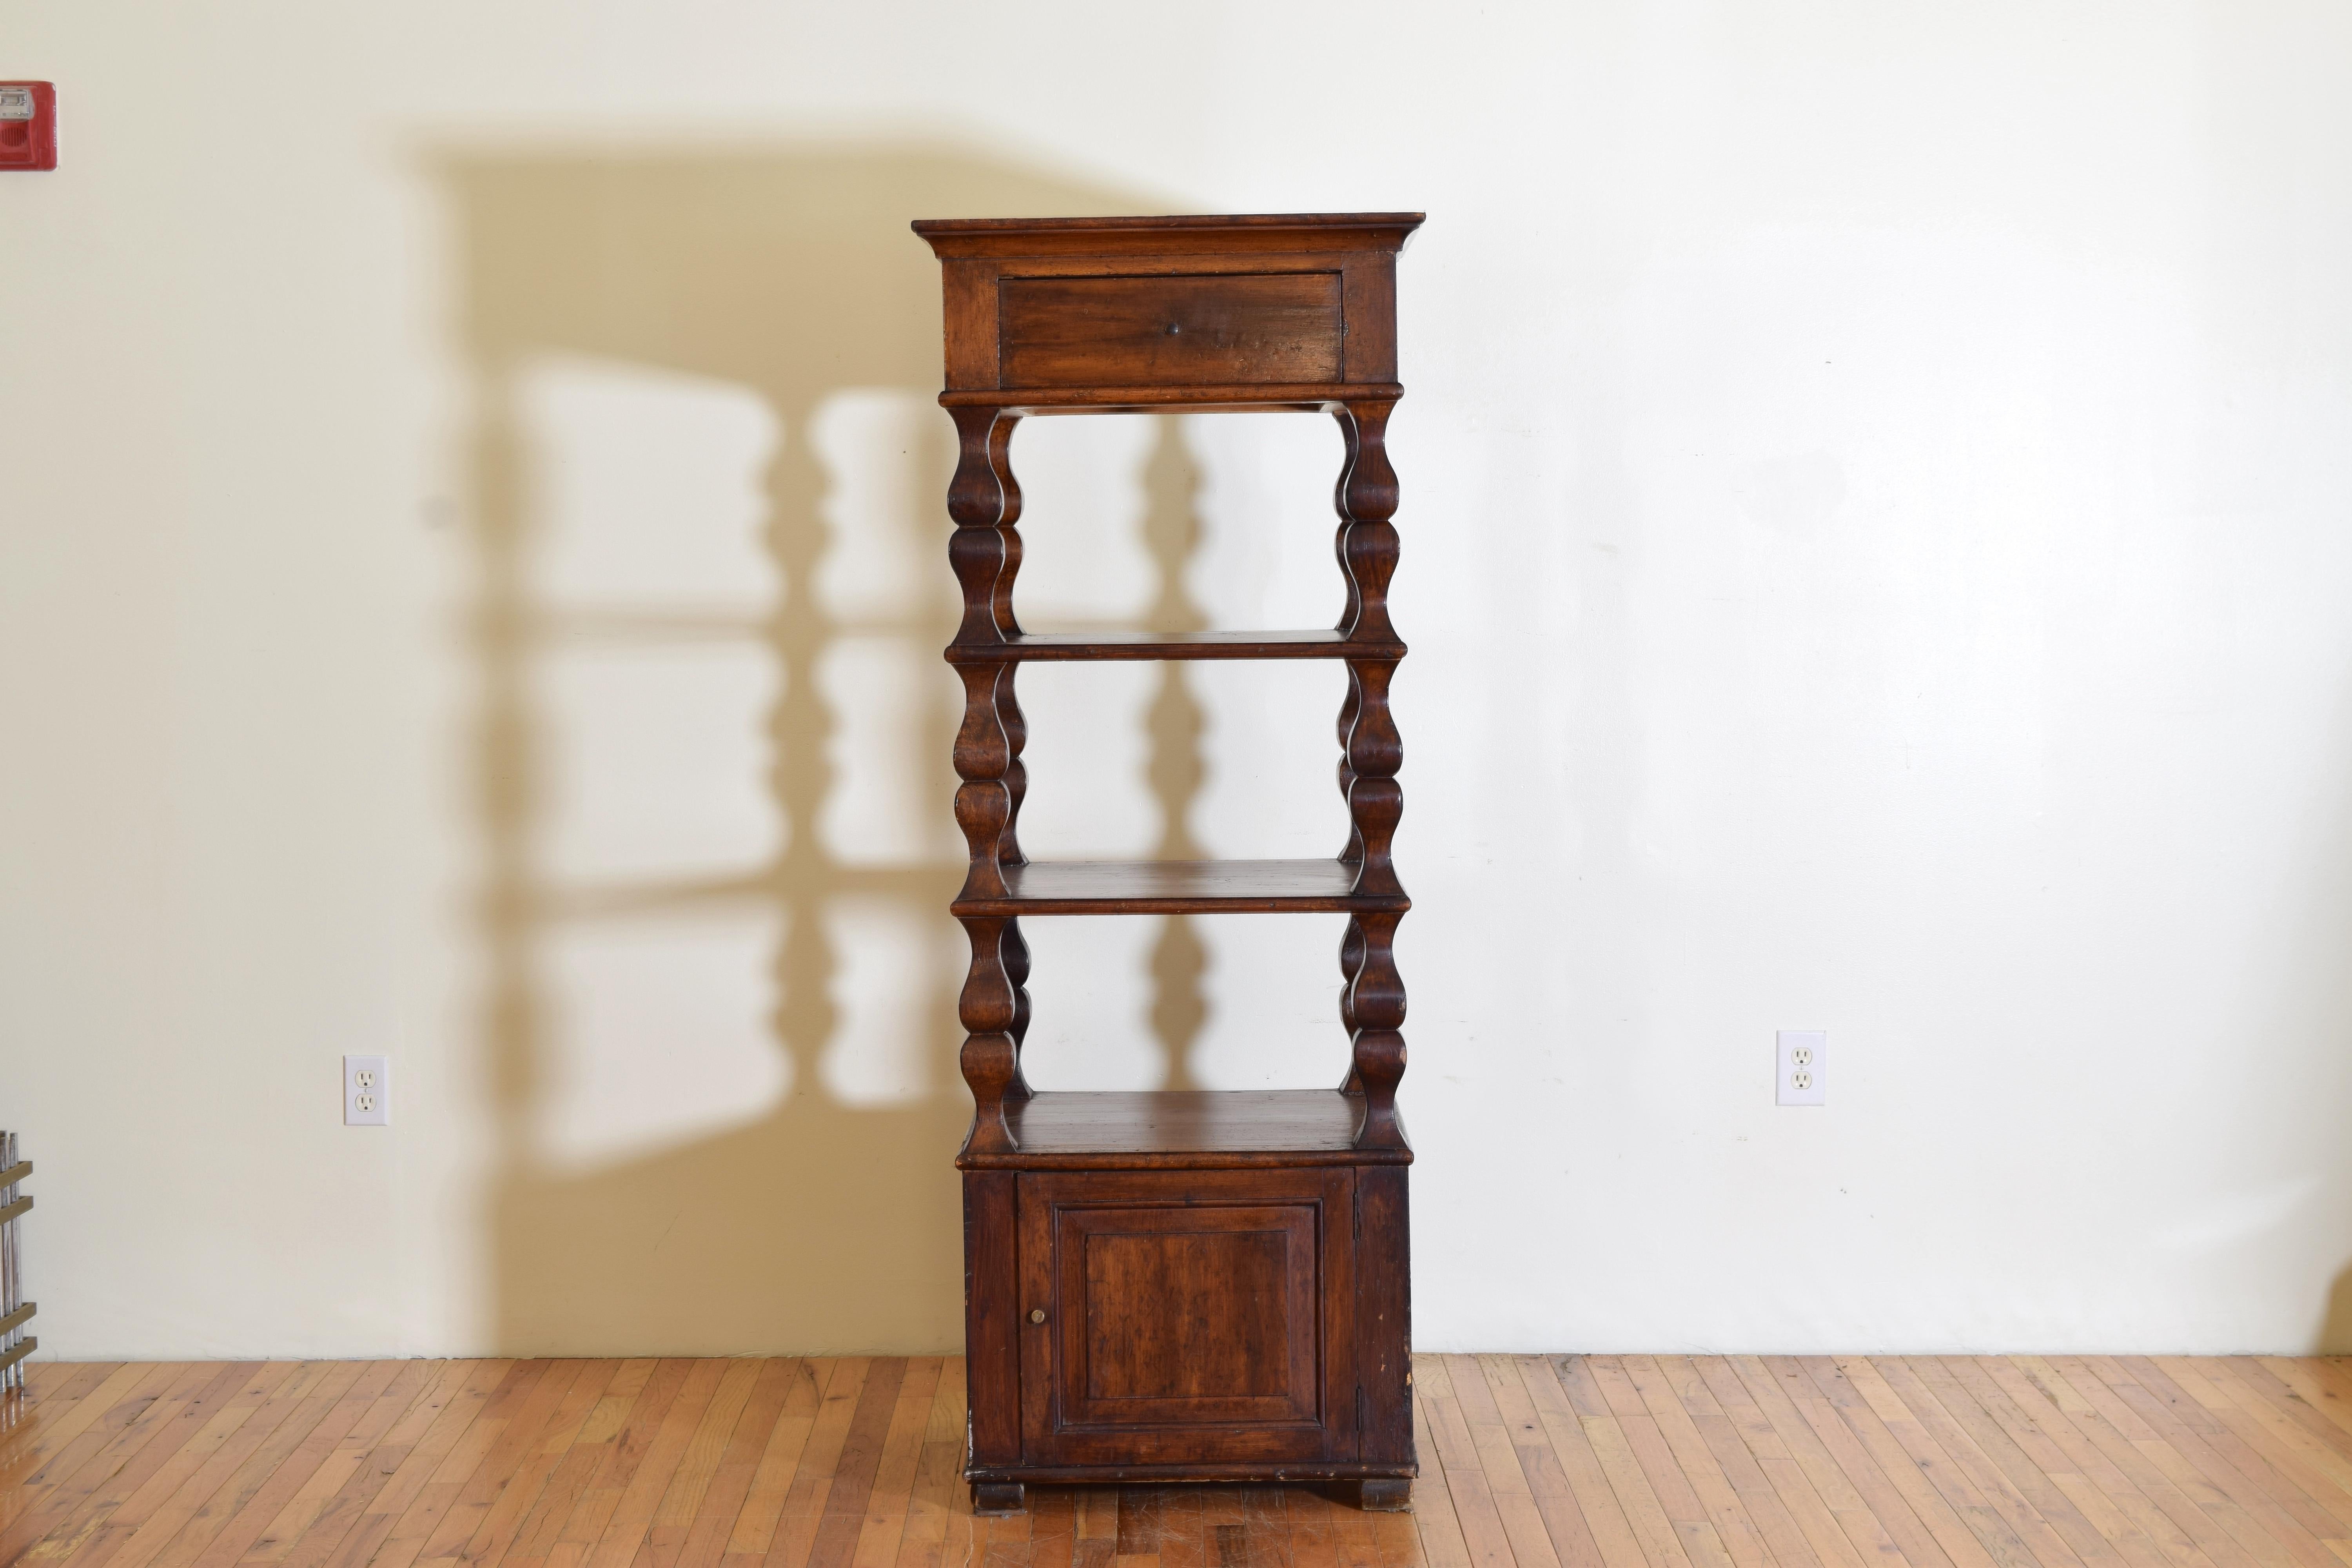 Southern Italian Abete (Fir) LXIV Style Etagere Cabinet, 3rd quarter 19th cen. In Good Condition For Sale In Atlanta, GA